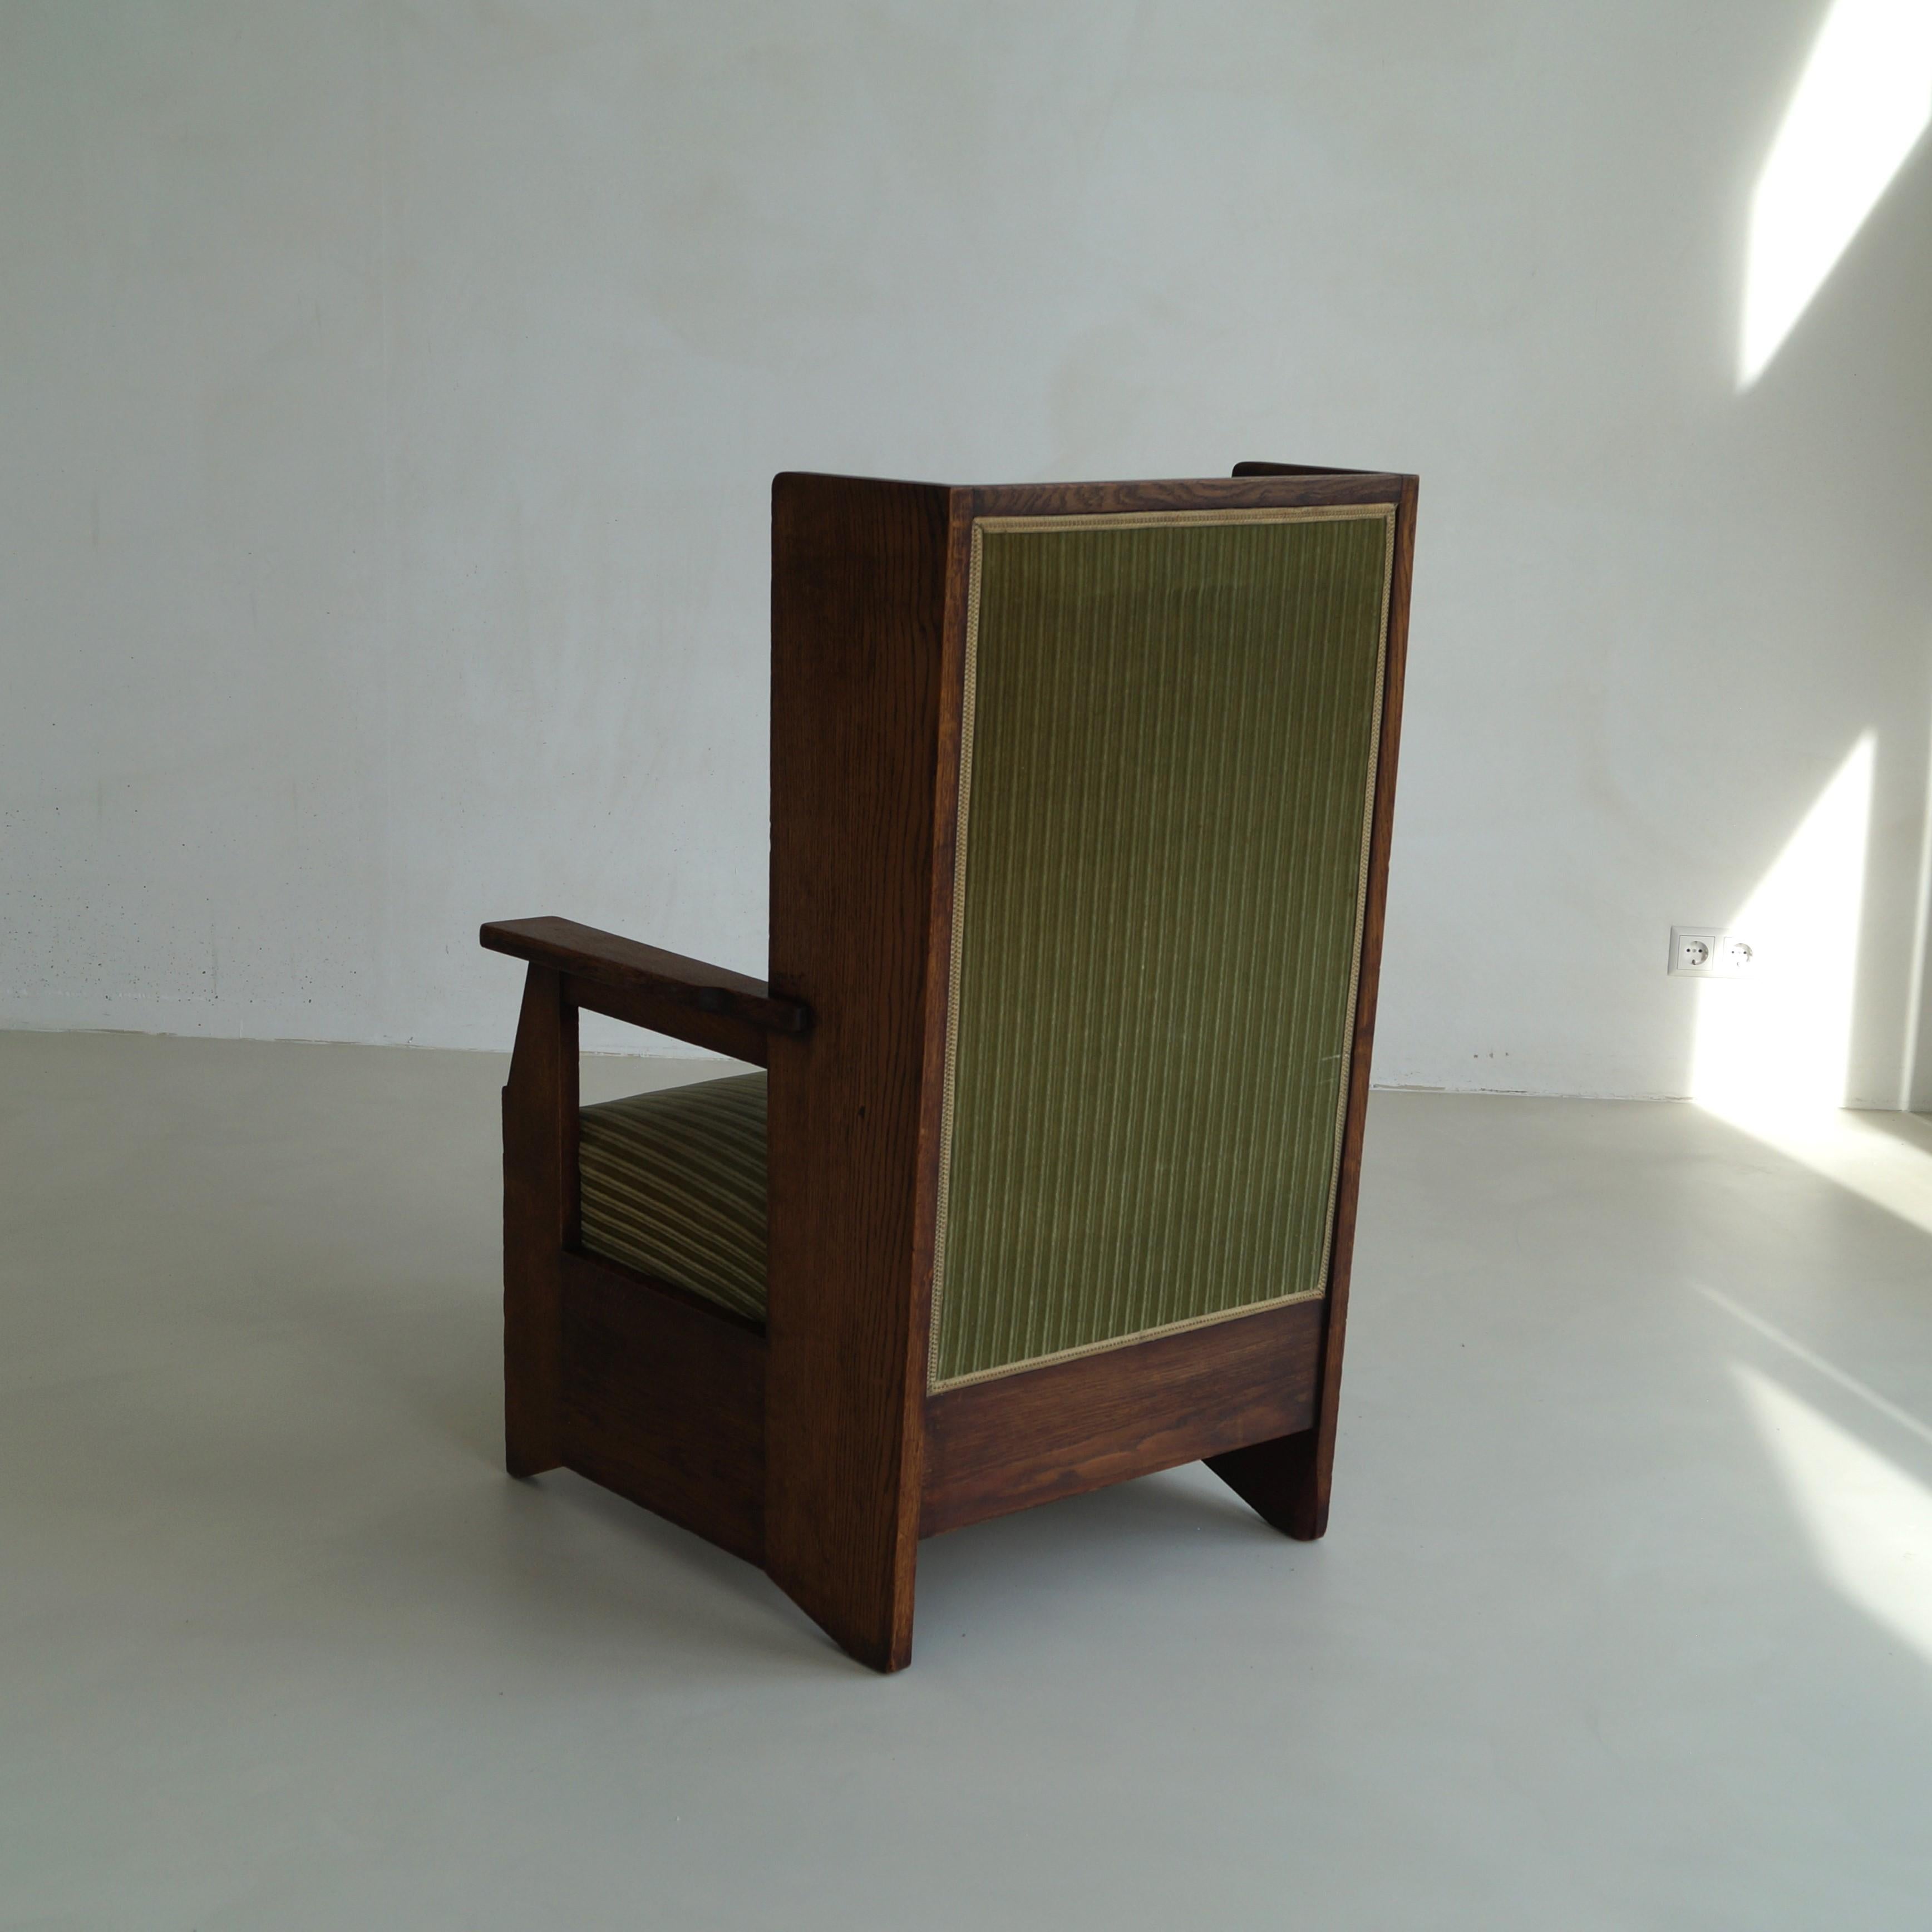 Dutch Art Deco Haagse School high back chair by Hendrik Wouda for Pander, 1924 For Sale 3